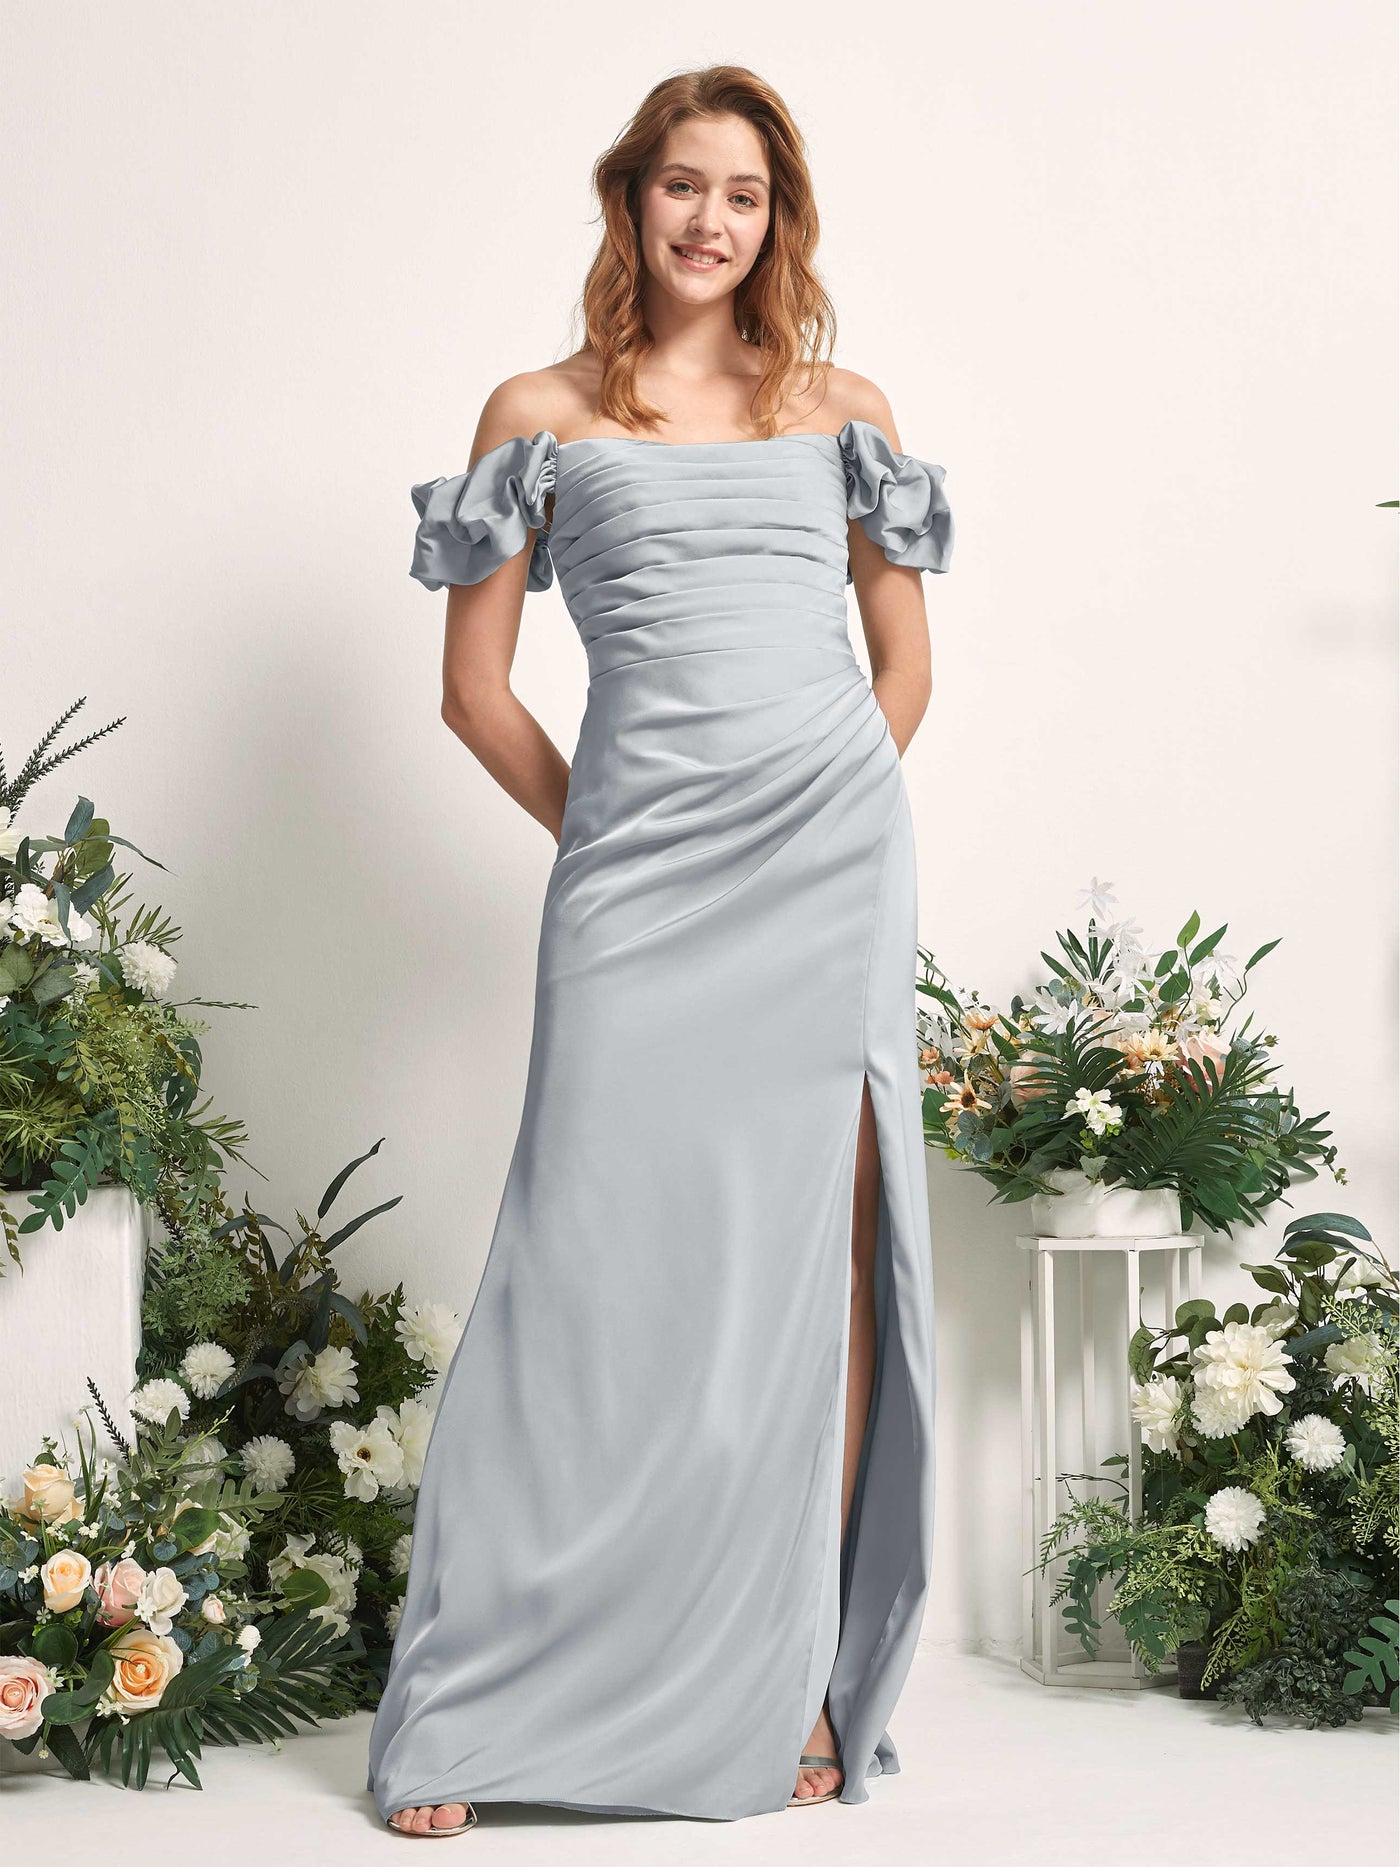 Baby Blue Bridesmaid Dresses Bridesmaid Dress A-line Satin Off Shoulder Full Length Short Sleeves Wedding Party Dress (80226401)#color_baby-blue